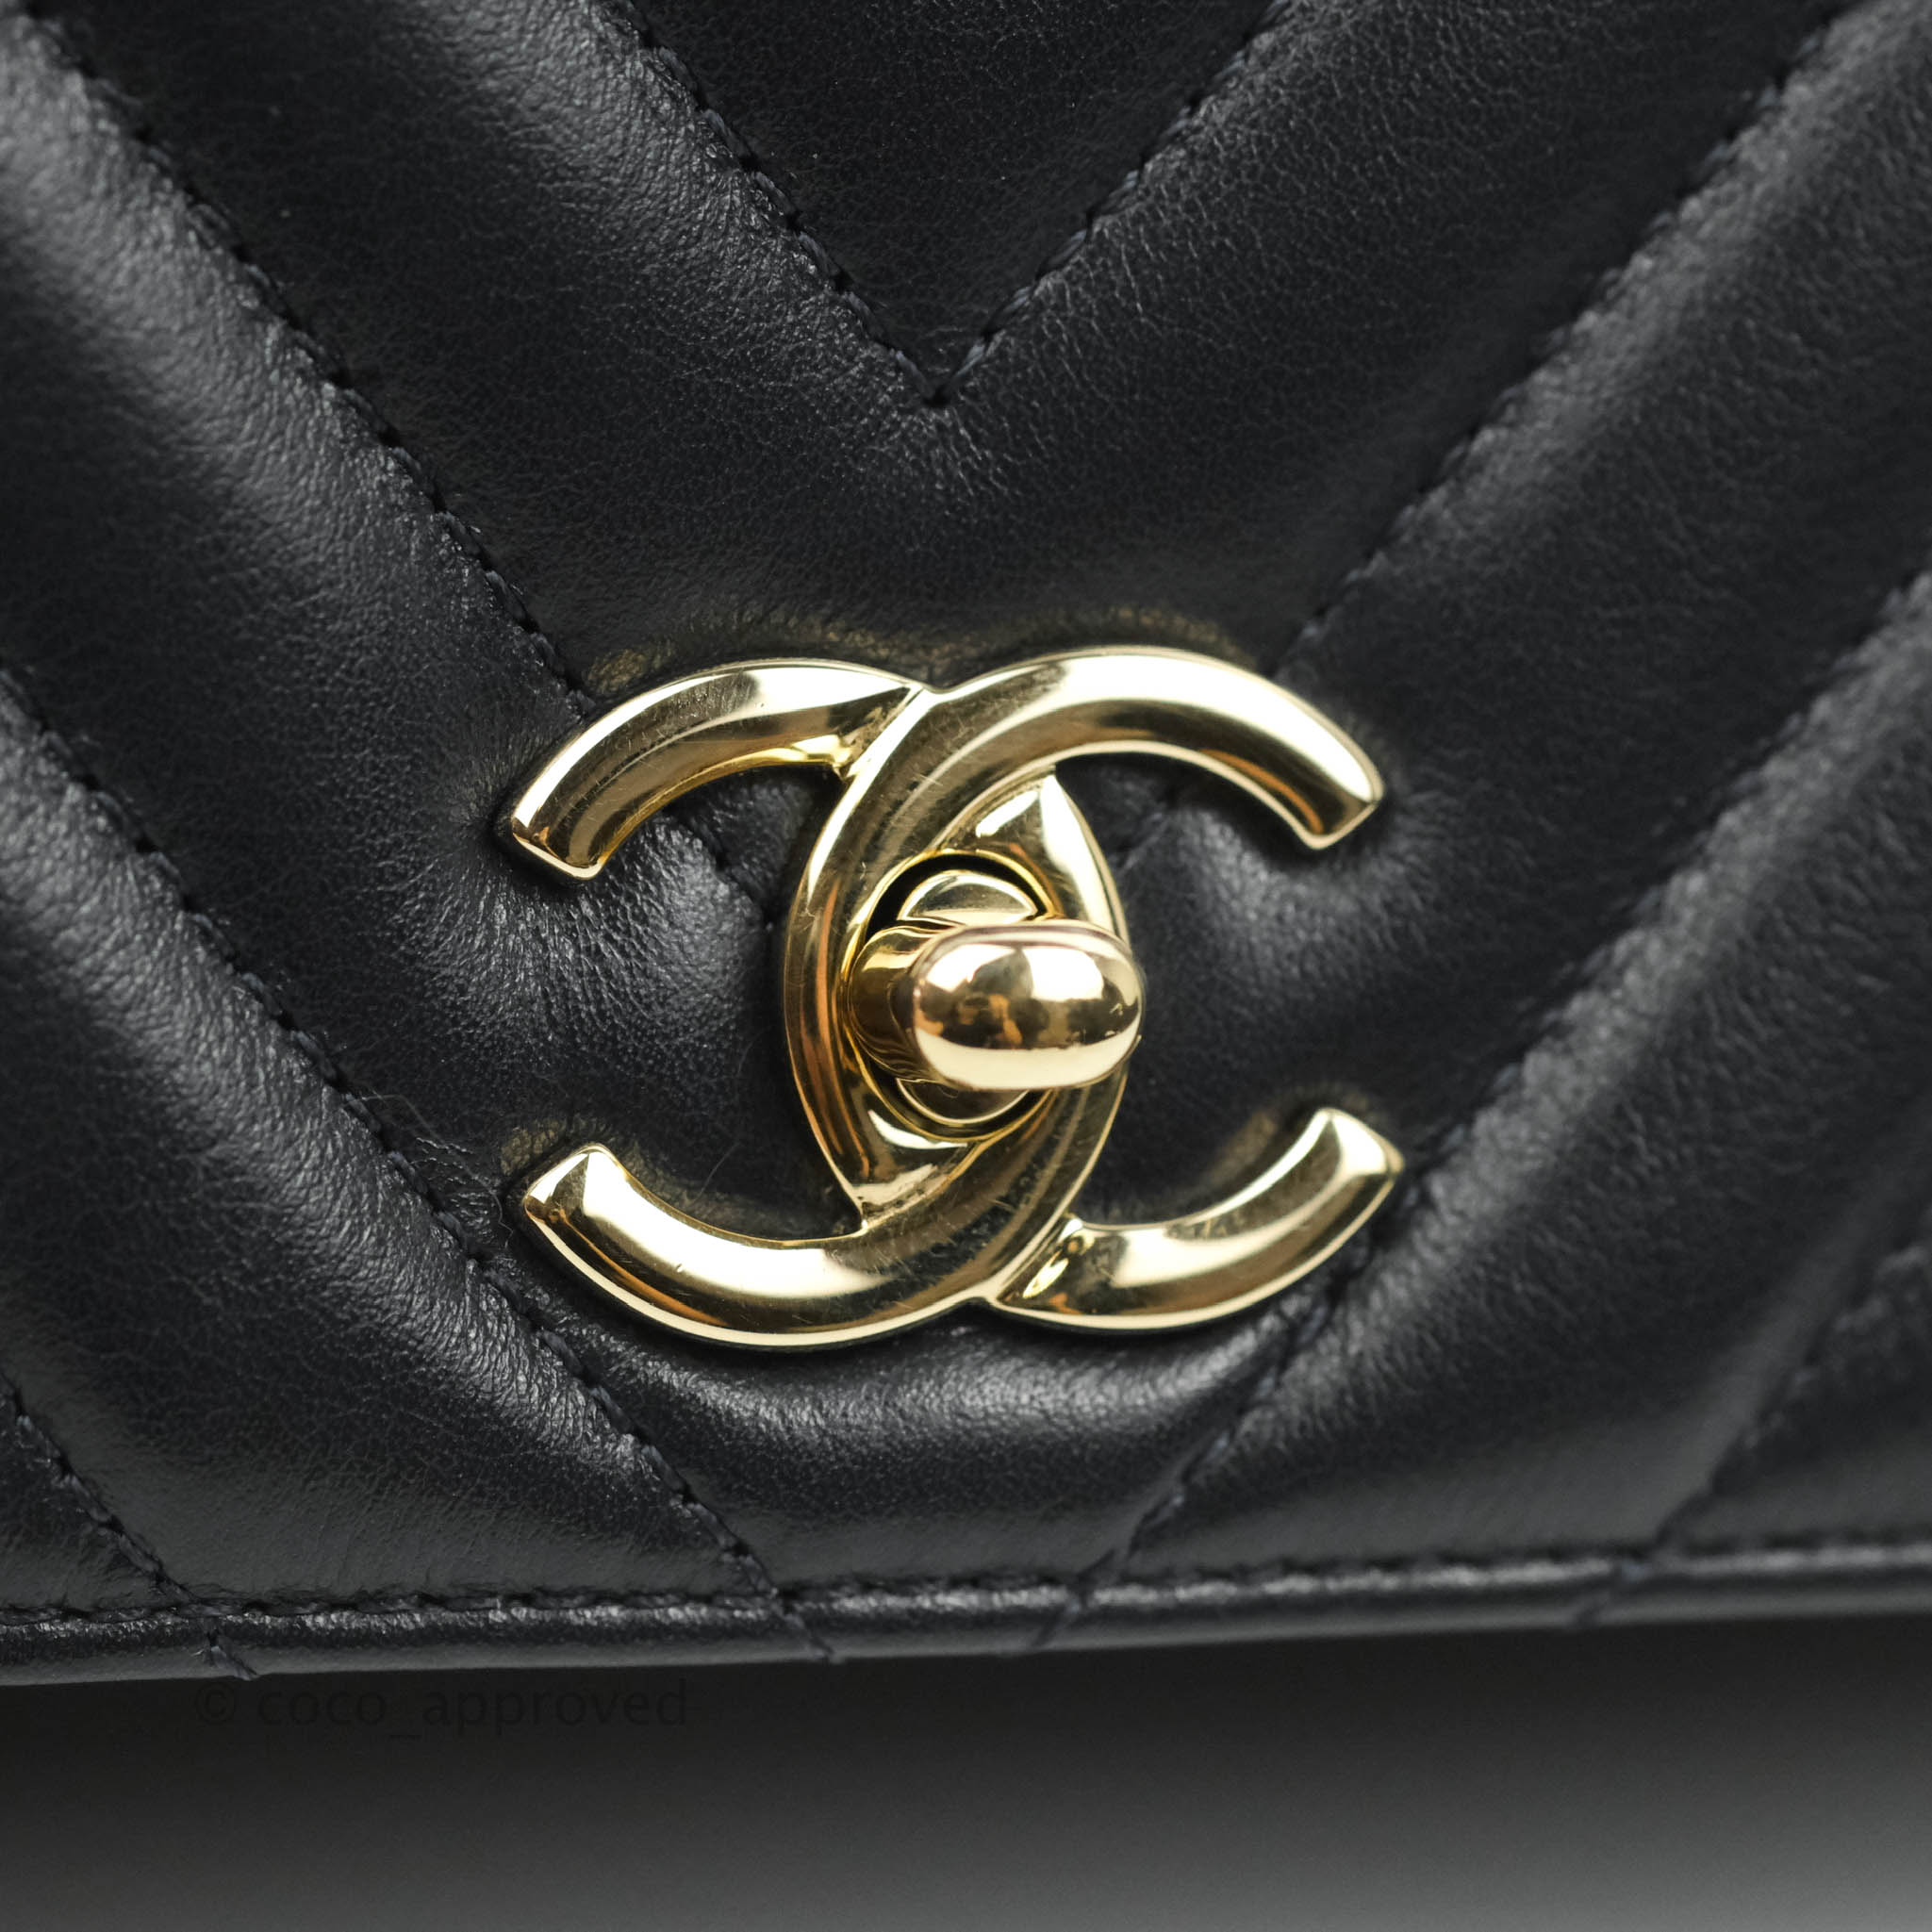 Chanel Calfskin Chevron Quilted Small Statement Flap Navy – STYLISHTOP